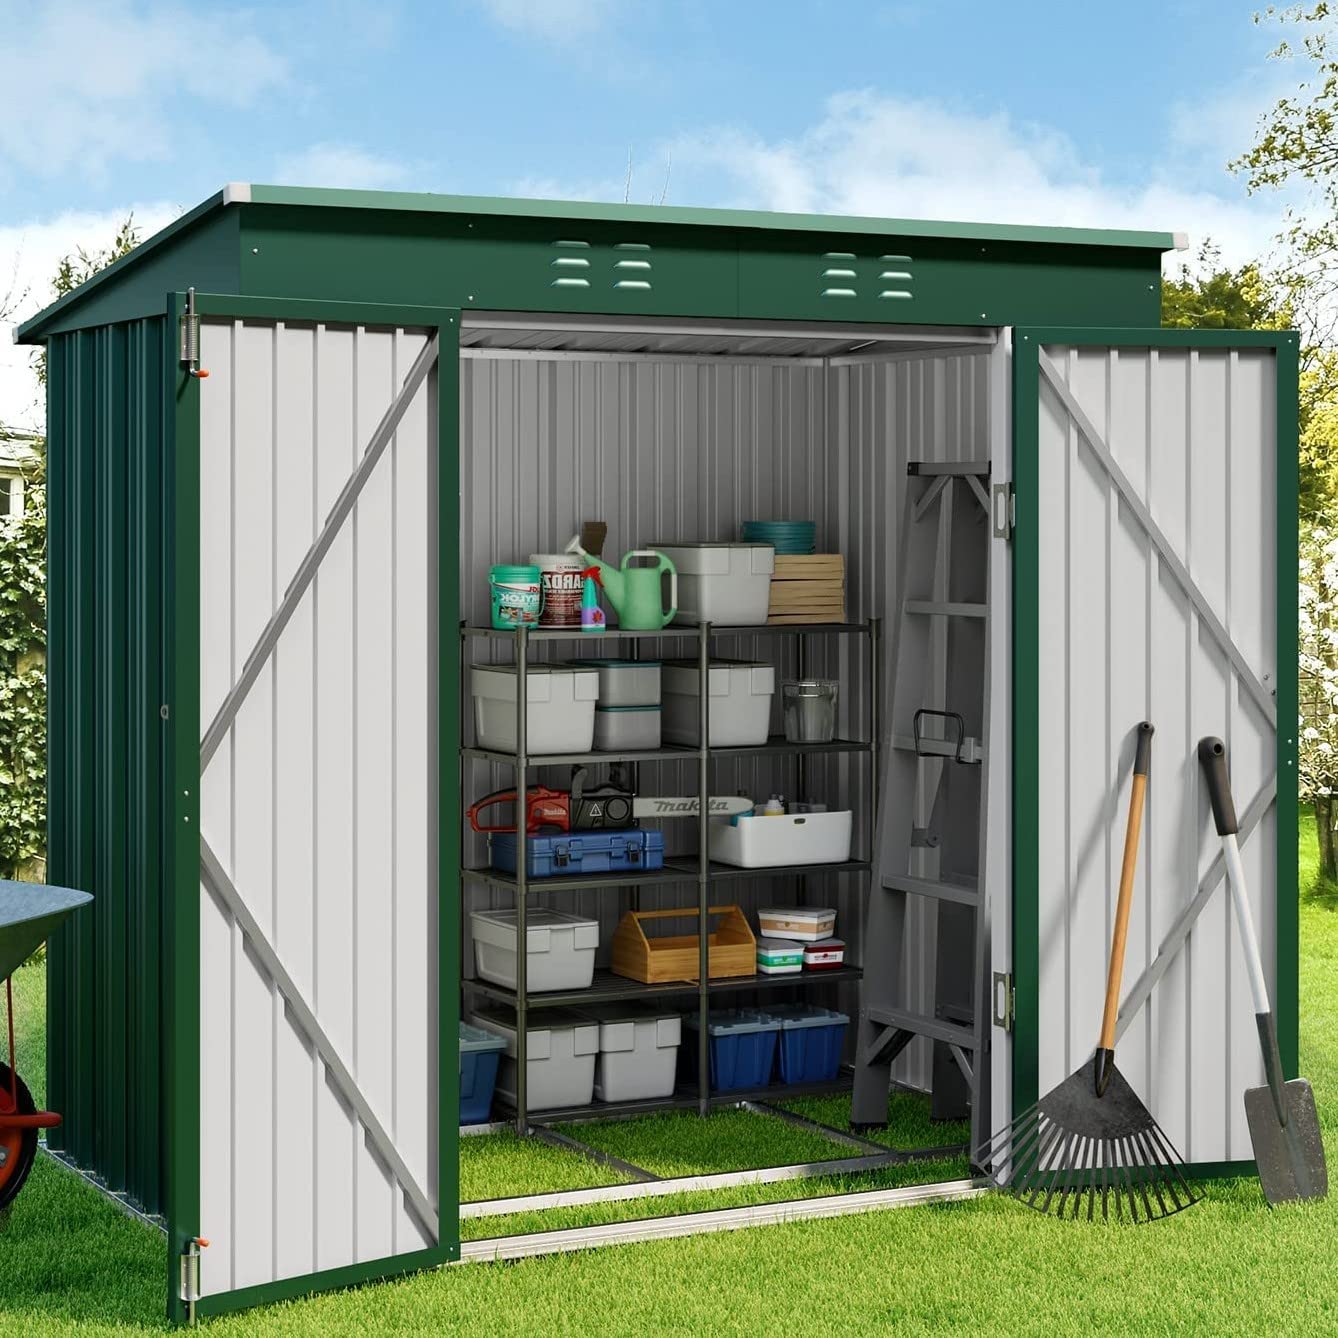 Aiho 6'x 4' Outdoor Storage Shed with Lockable Door for Garden Backyard Patio - Green - image 3 of 11